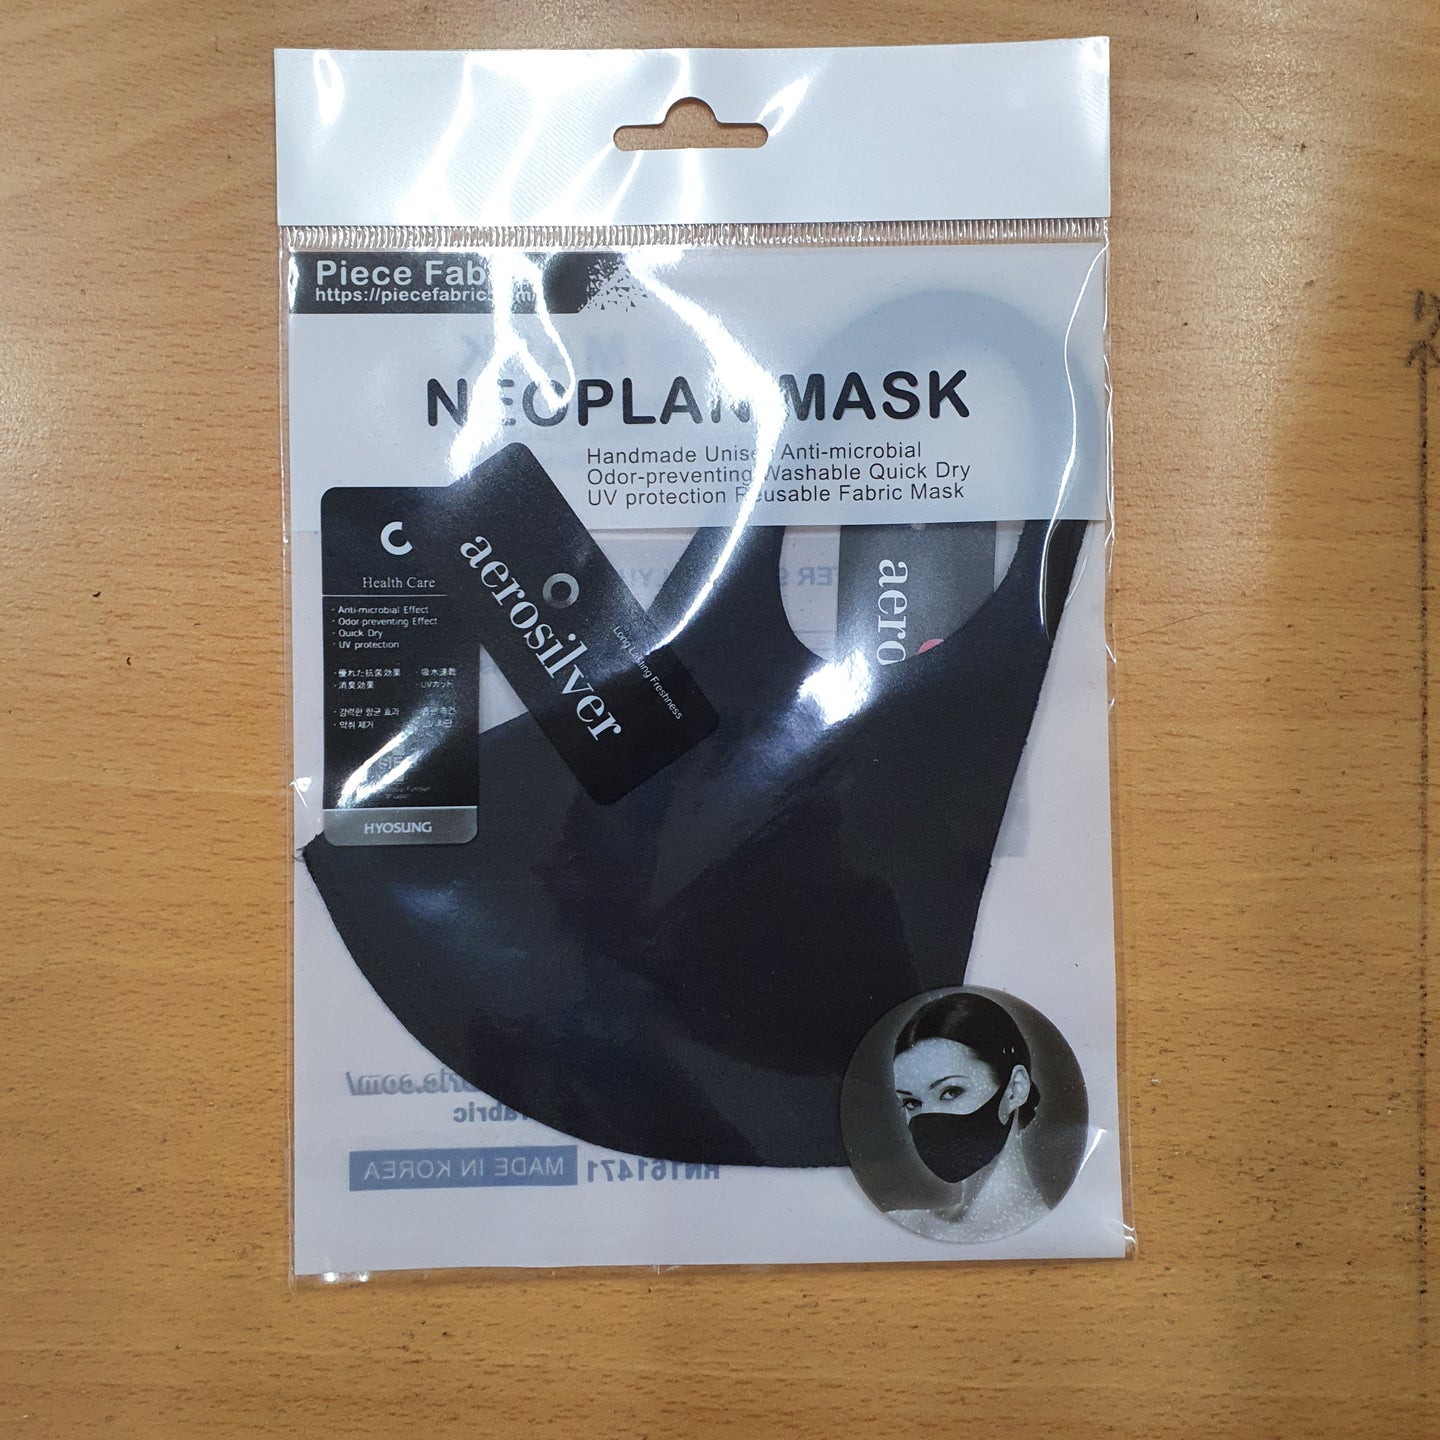 Unisex Anti-microbial Odor-preventing Washable Quick Dry UV protection Reusable Fabric NEOPRENE MASK